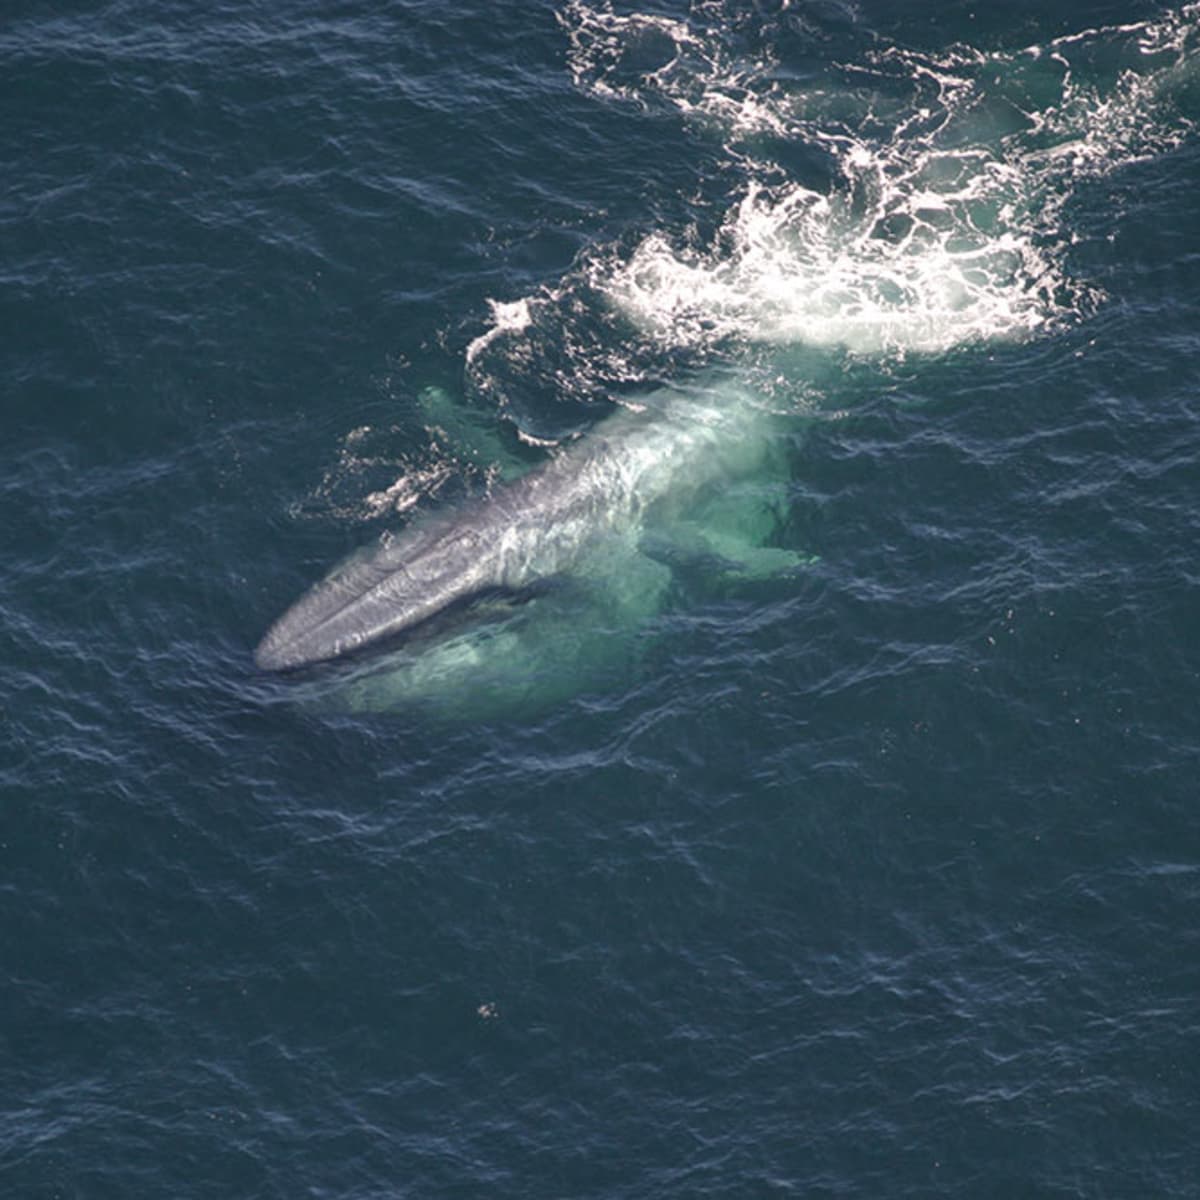 35 Facts About the Blue Whale - Owlcation